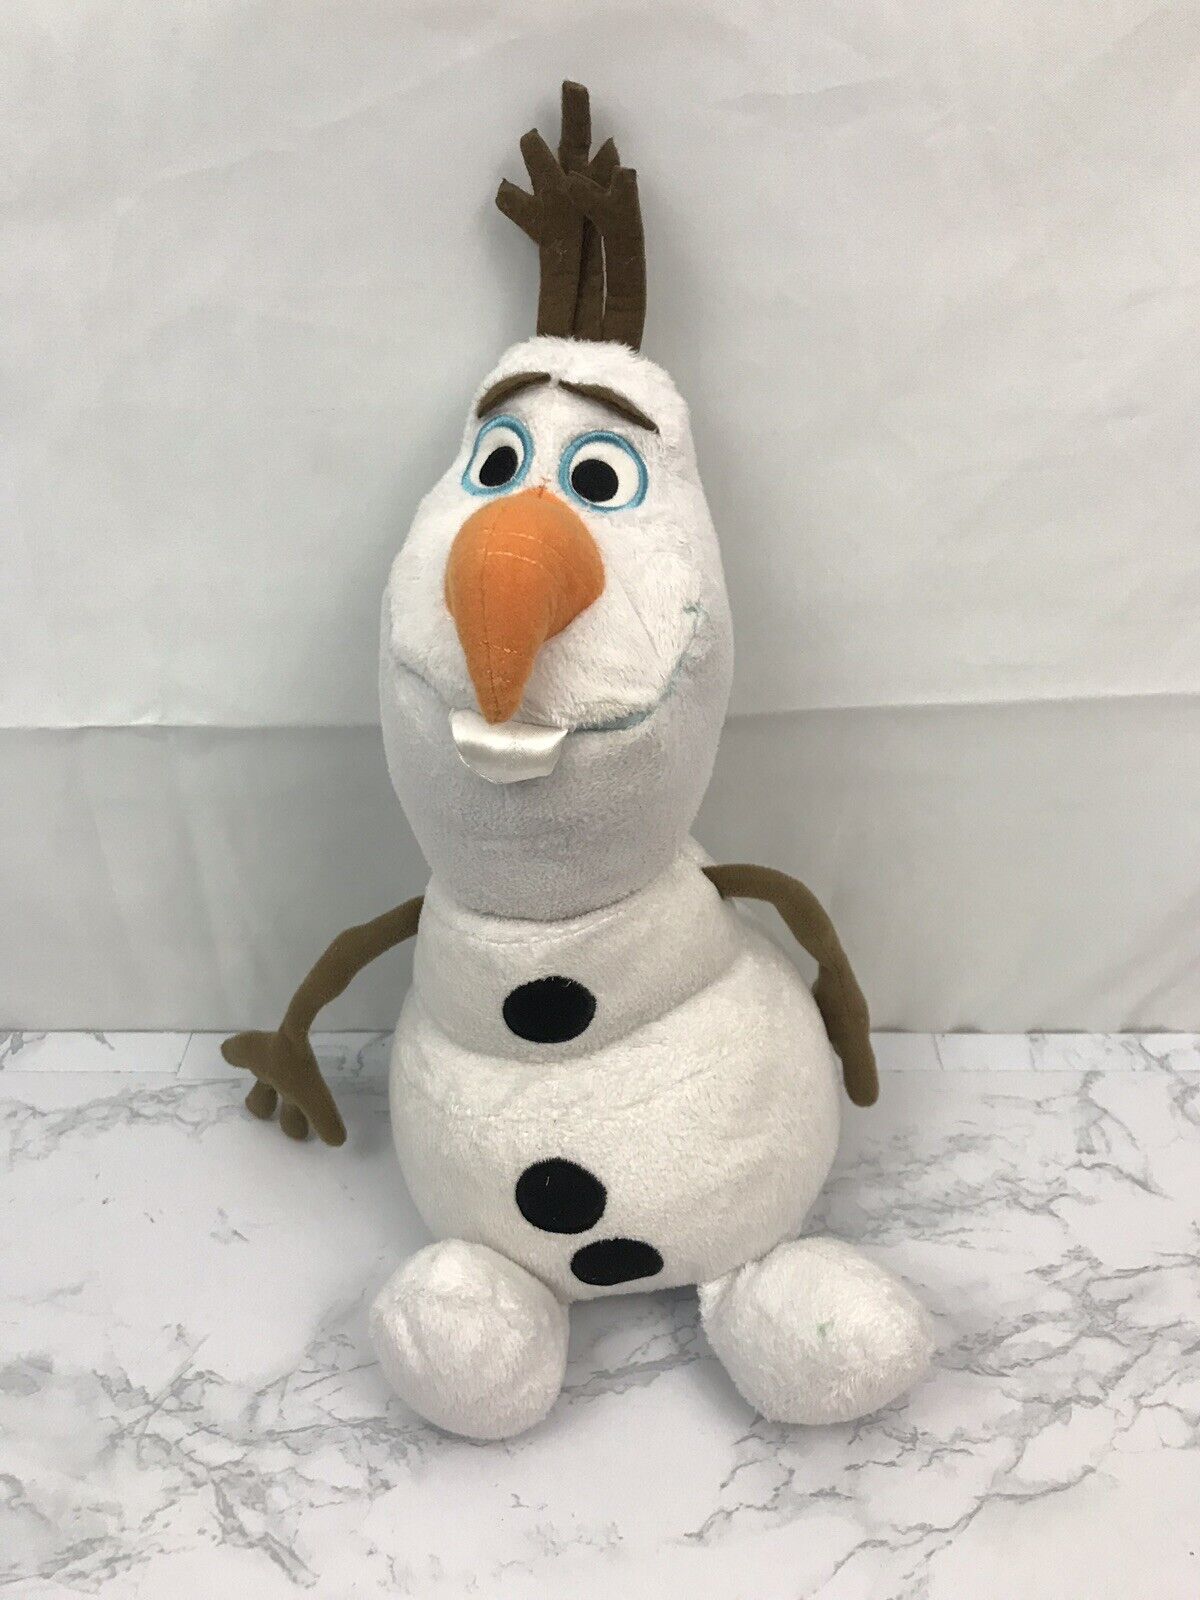 Disney Frozen Olaf 15 inch Plush Toy Doll Authentic Collectable I